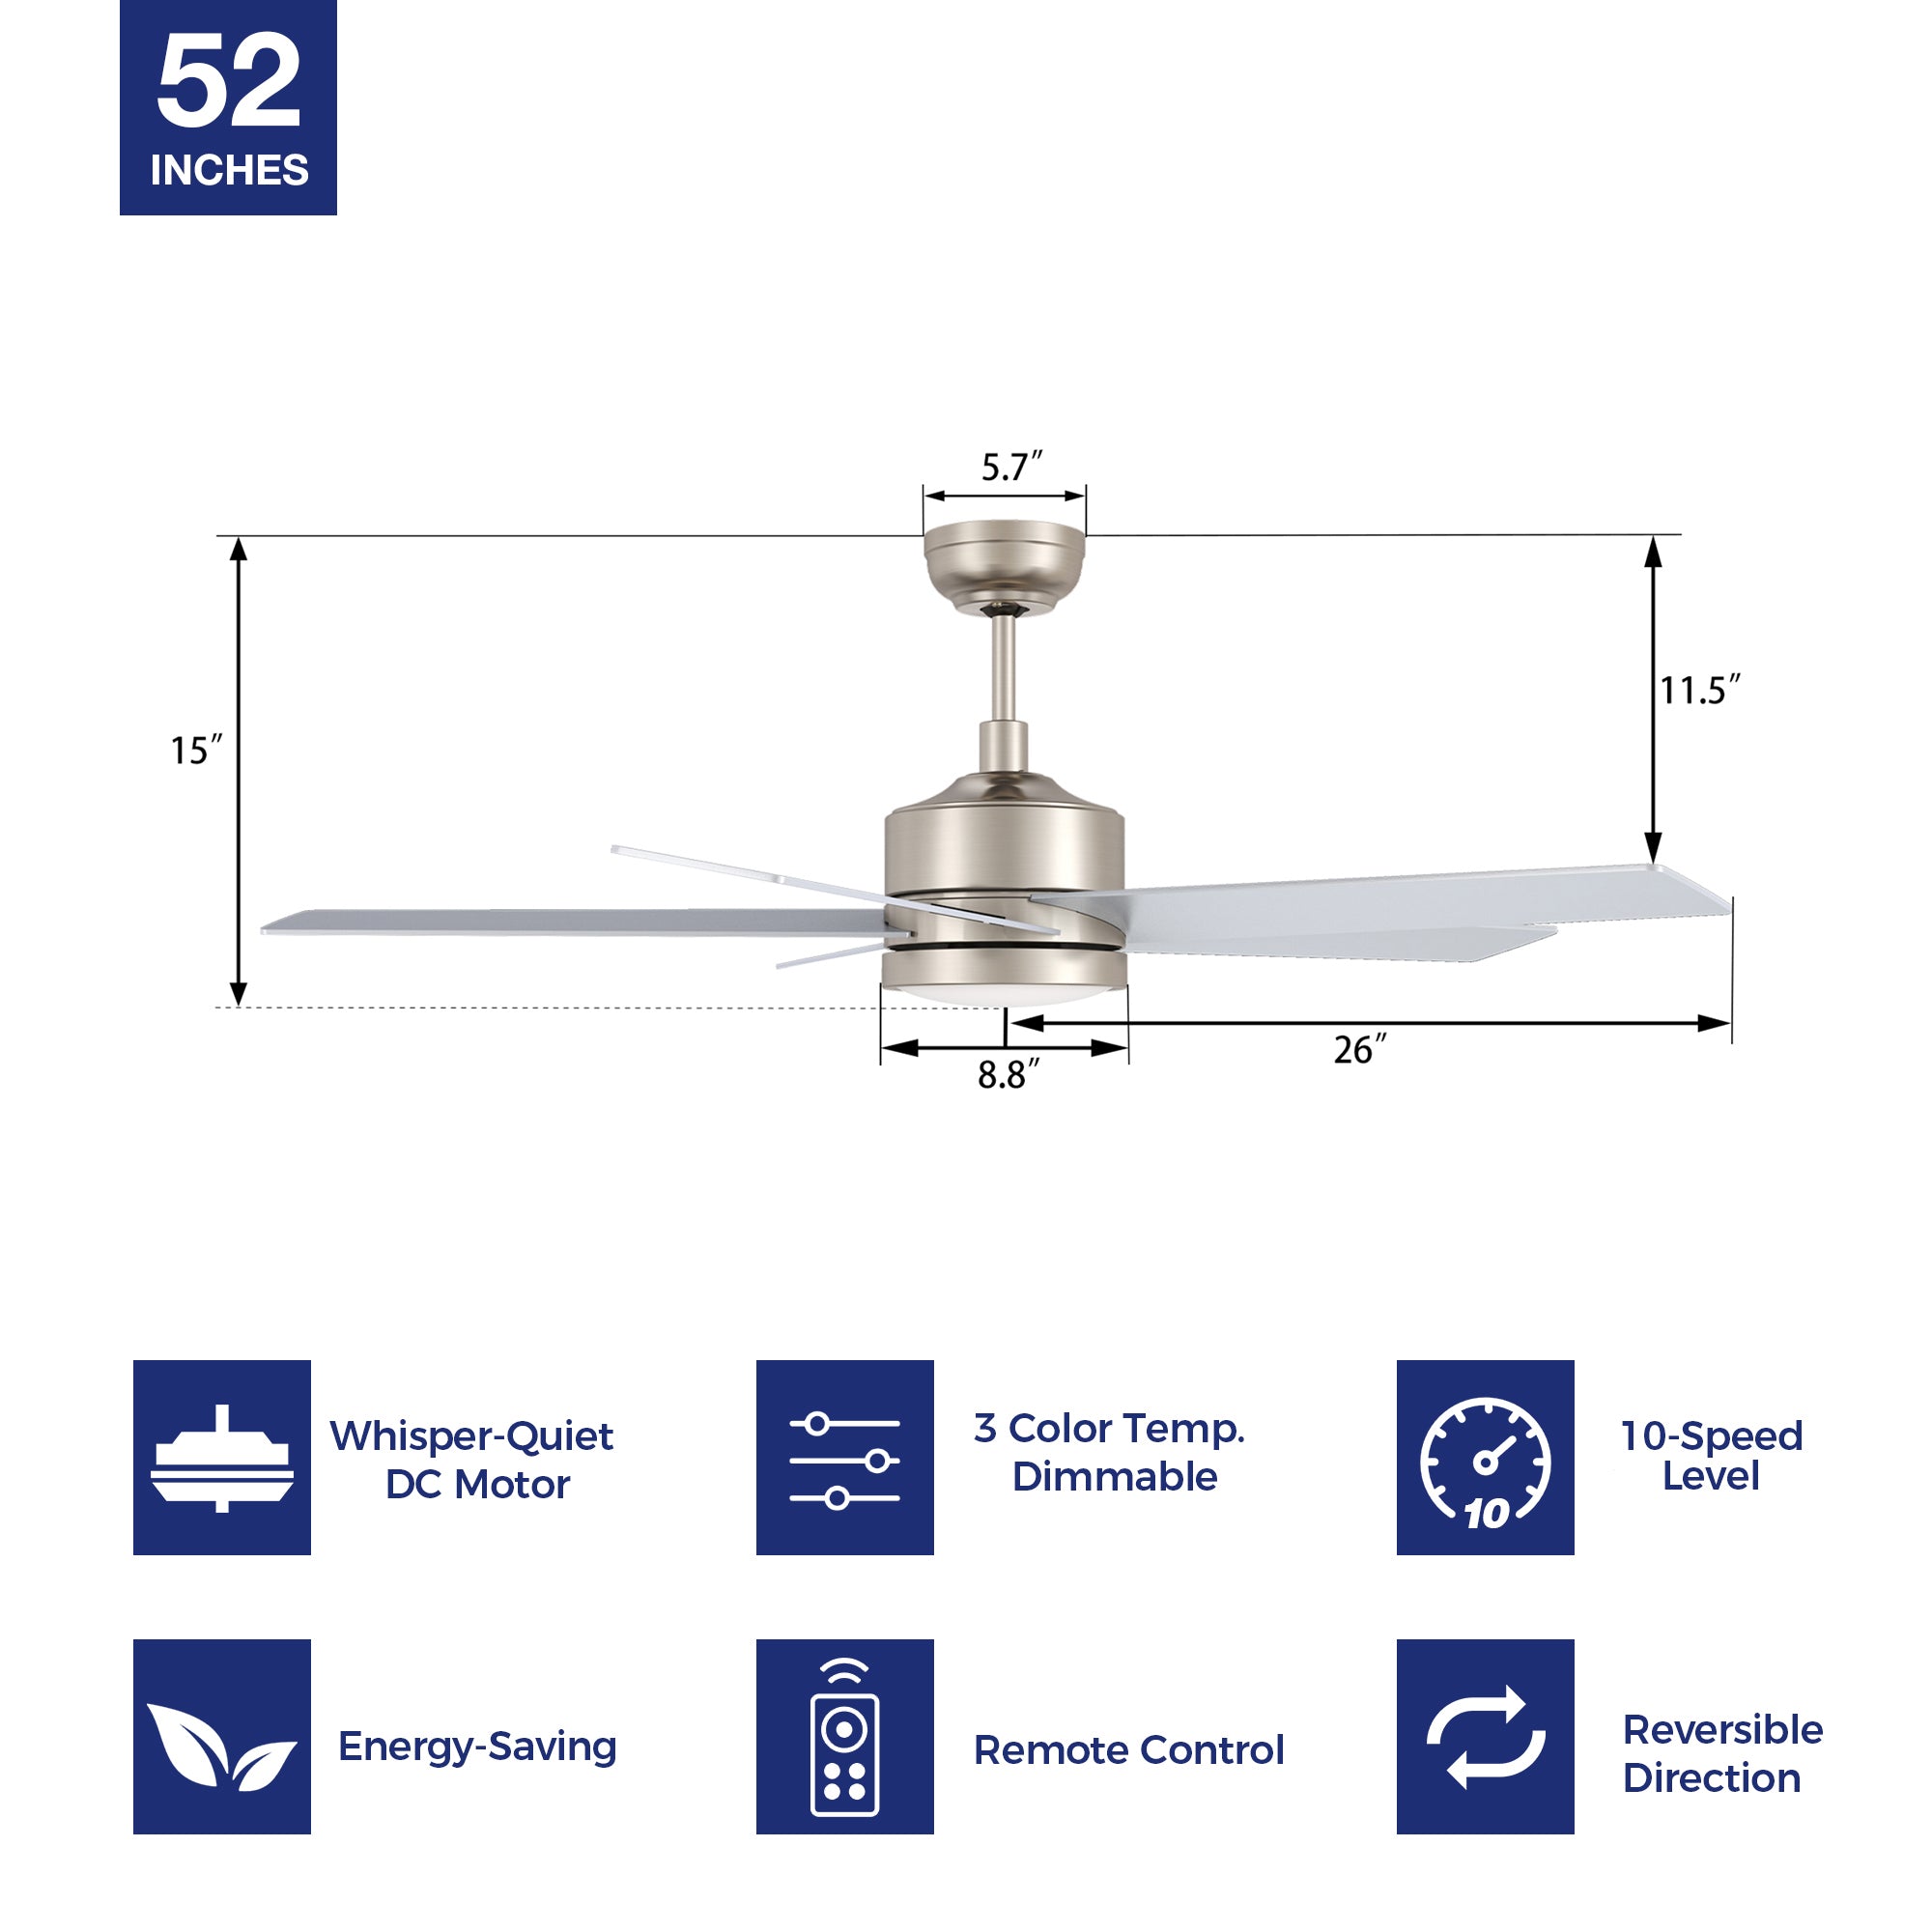 52in modern downrod mounted silver ceiling fan special features, whisper-quite dc motor, 3 color temp dimmable, 10-speed setting, remote control, energy-saving. 